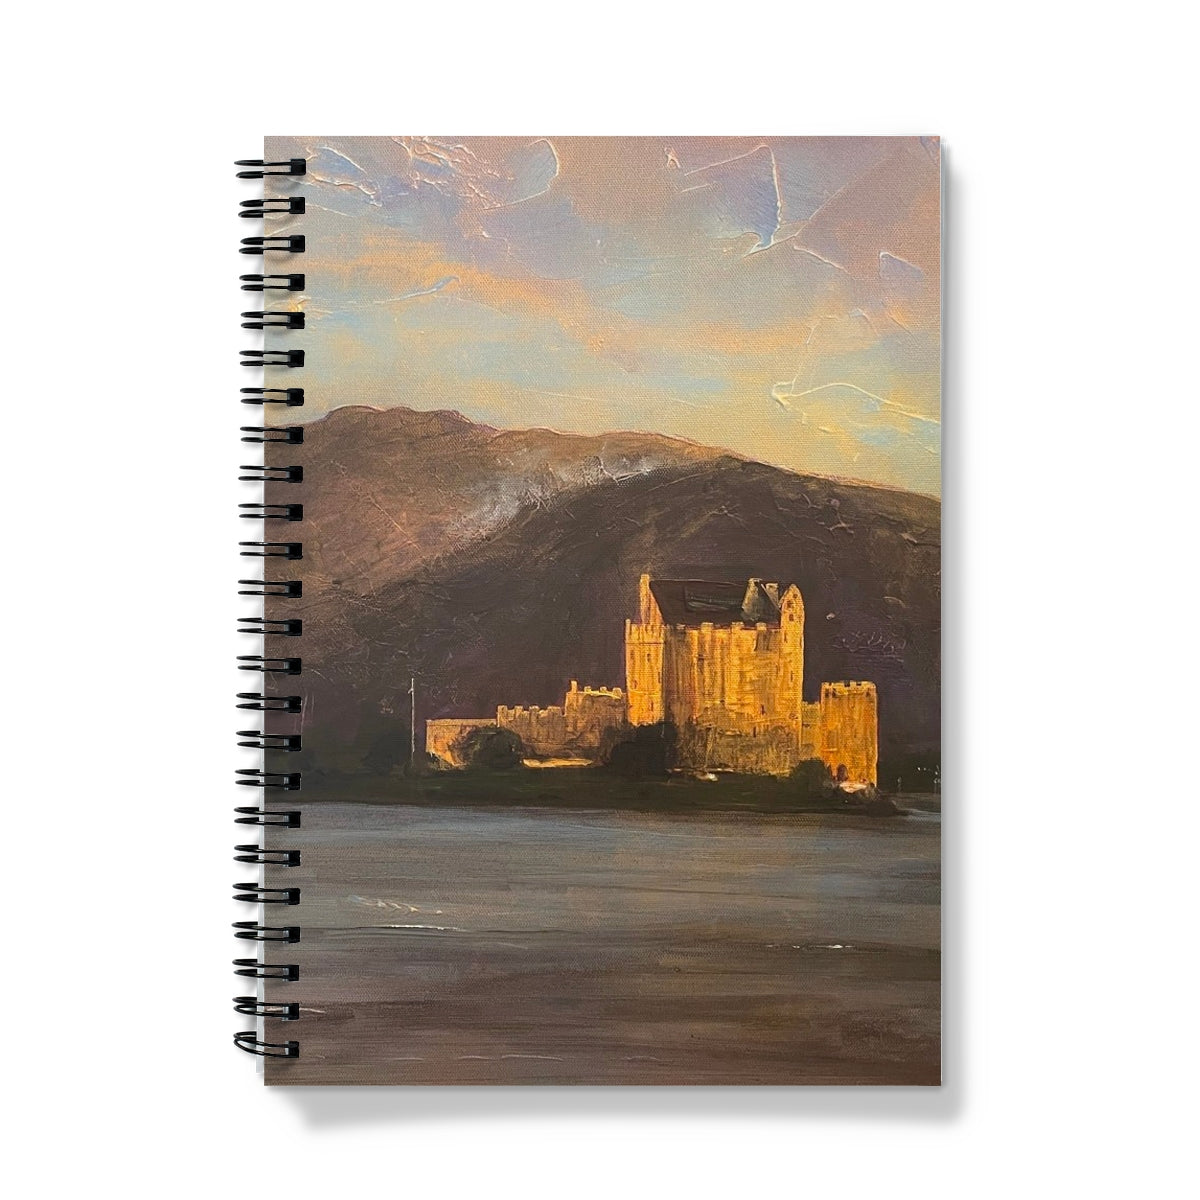 Eilean Donan Castle Art Gifts Notebook-Journals & Notebooks-Historic & Iconic Scotland Art Gallery-A5-Lined-Paintings, Prints, Homeware, Art Gifts From Scotland By Scottish Artist Kevin Hunter